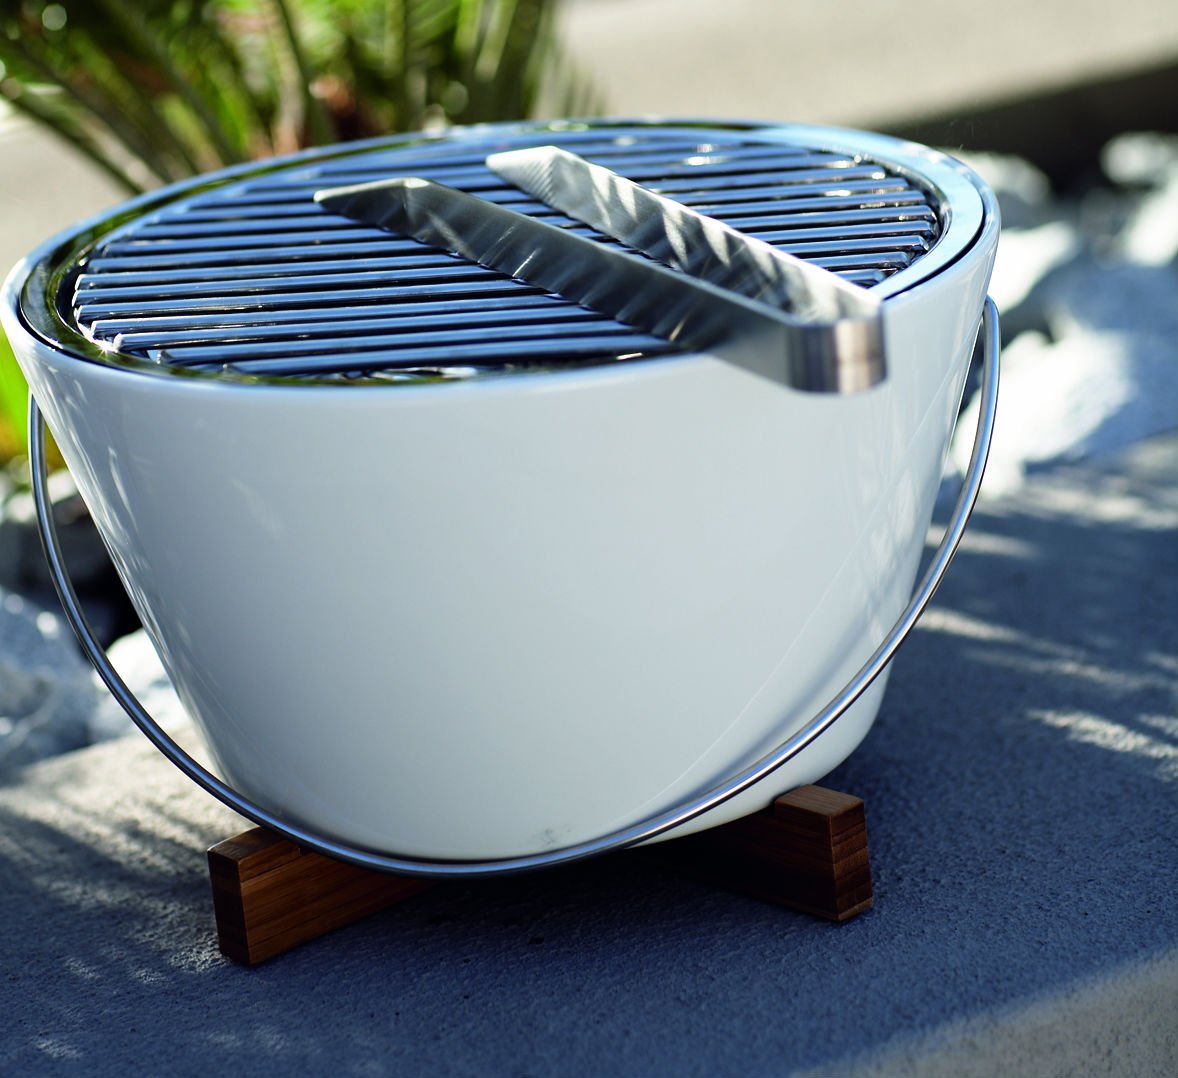 Haarvaten kruis Assortiment Table BBQ Grill White – Eva Solo | Webshop.swimmingpools.be